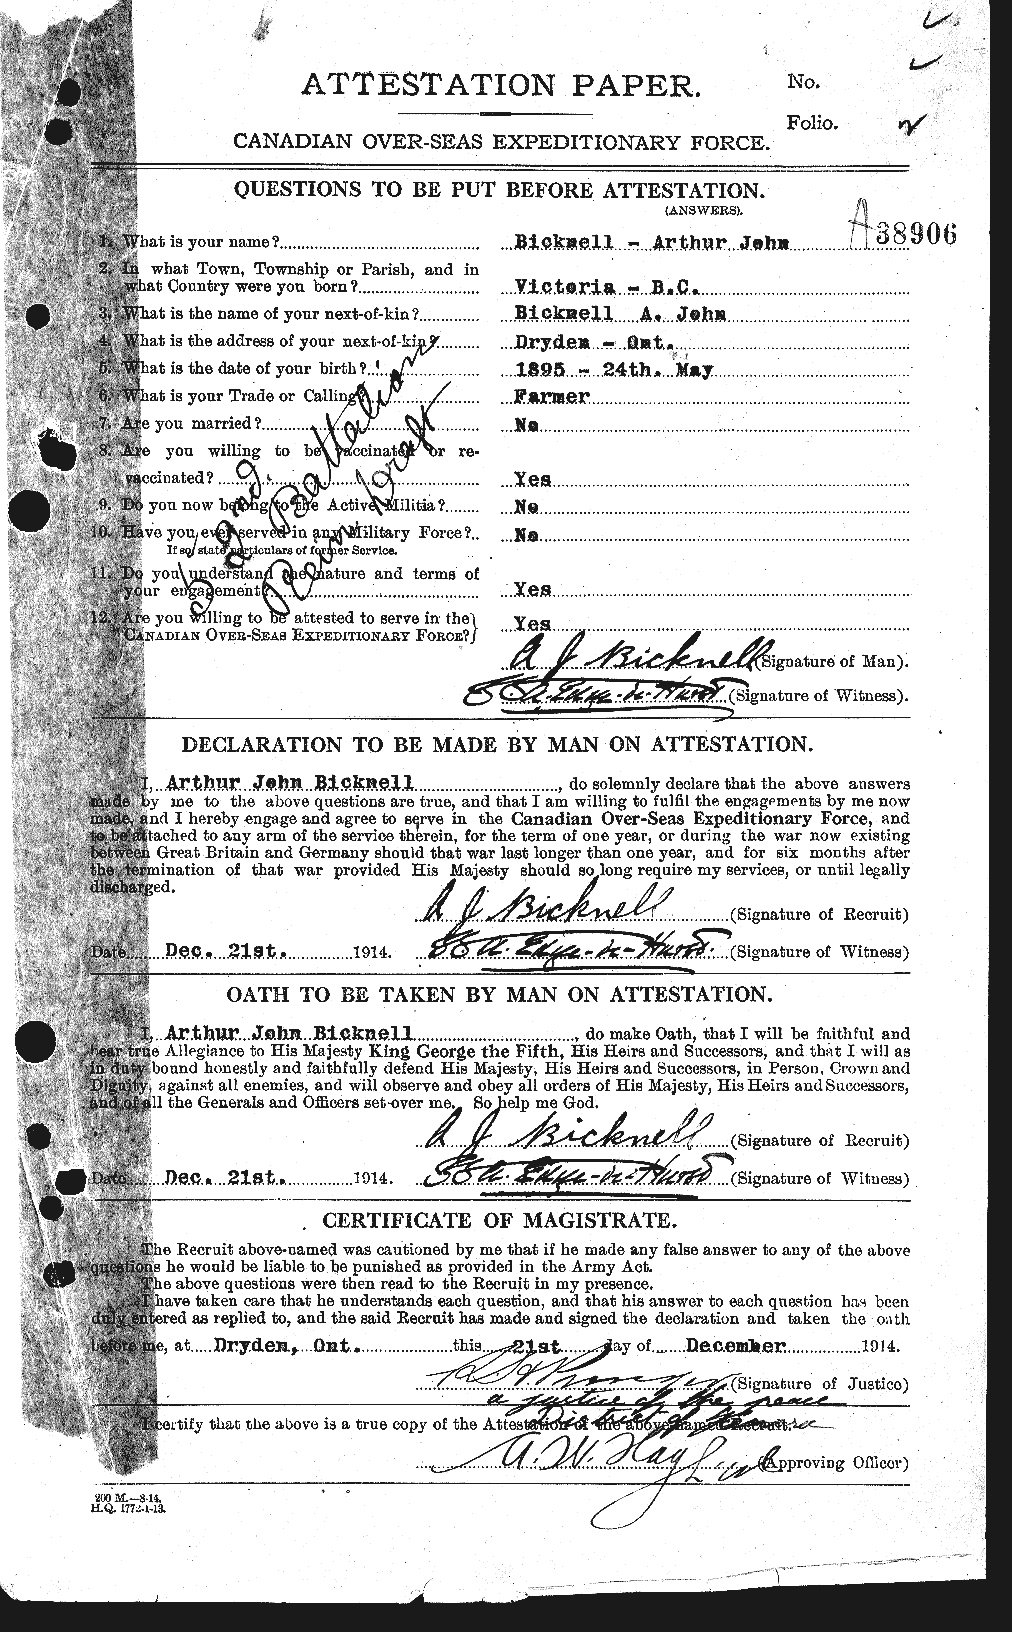 Personnel Records of the First World War - CEF 244883a